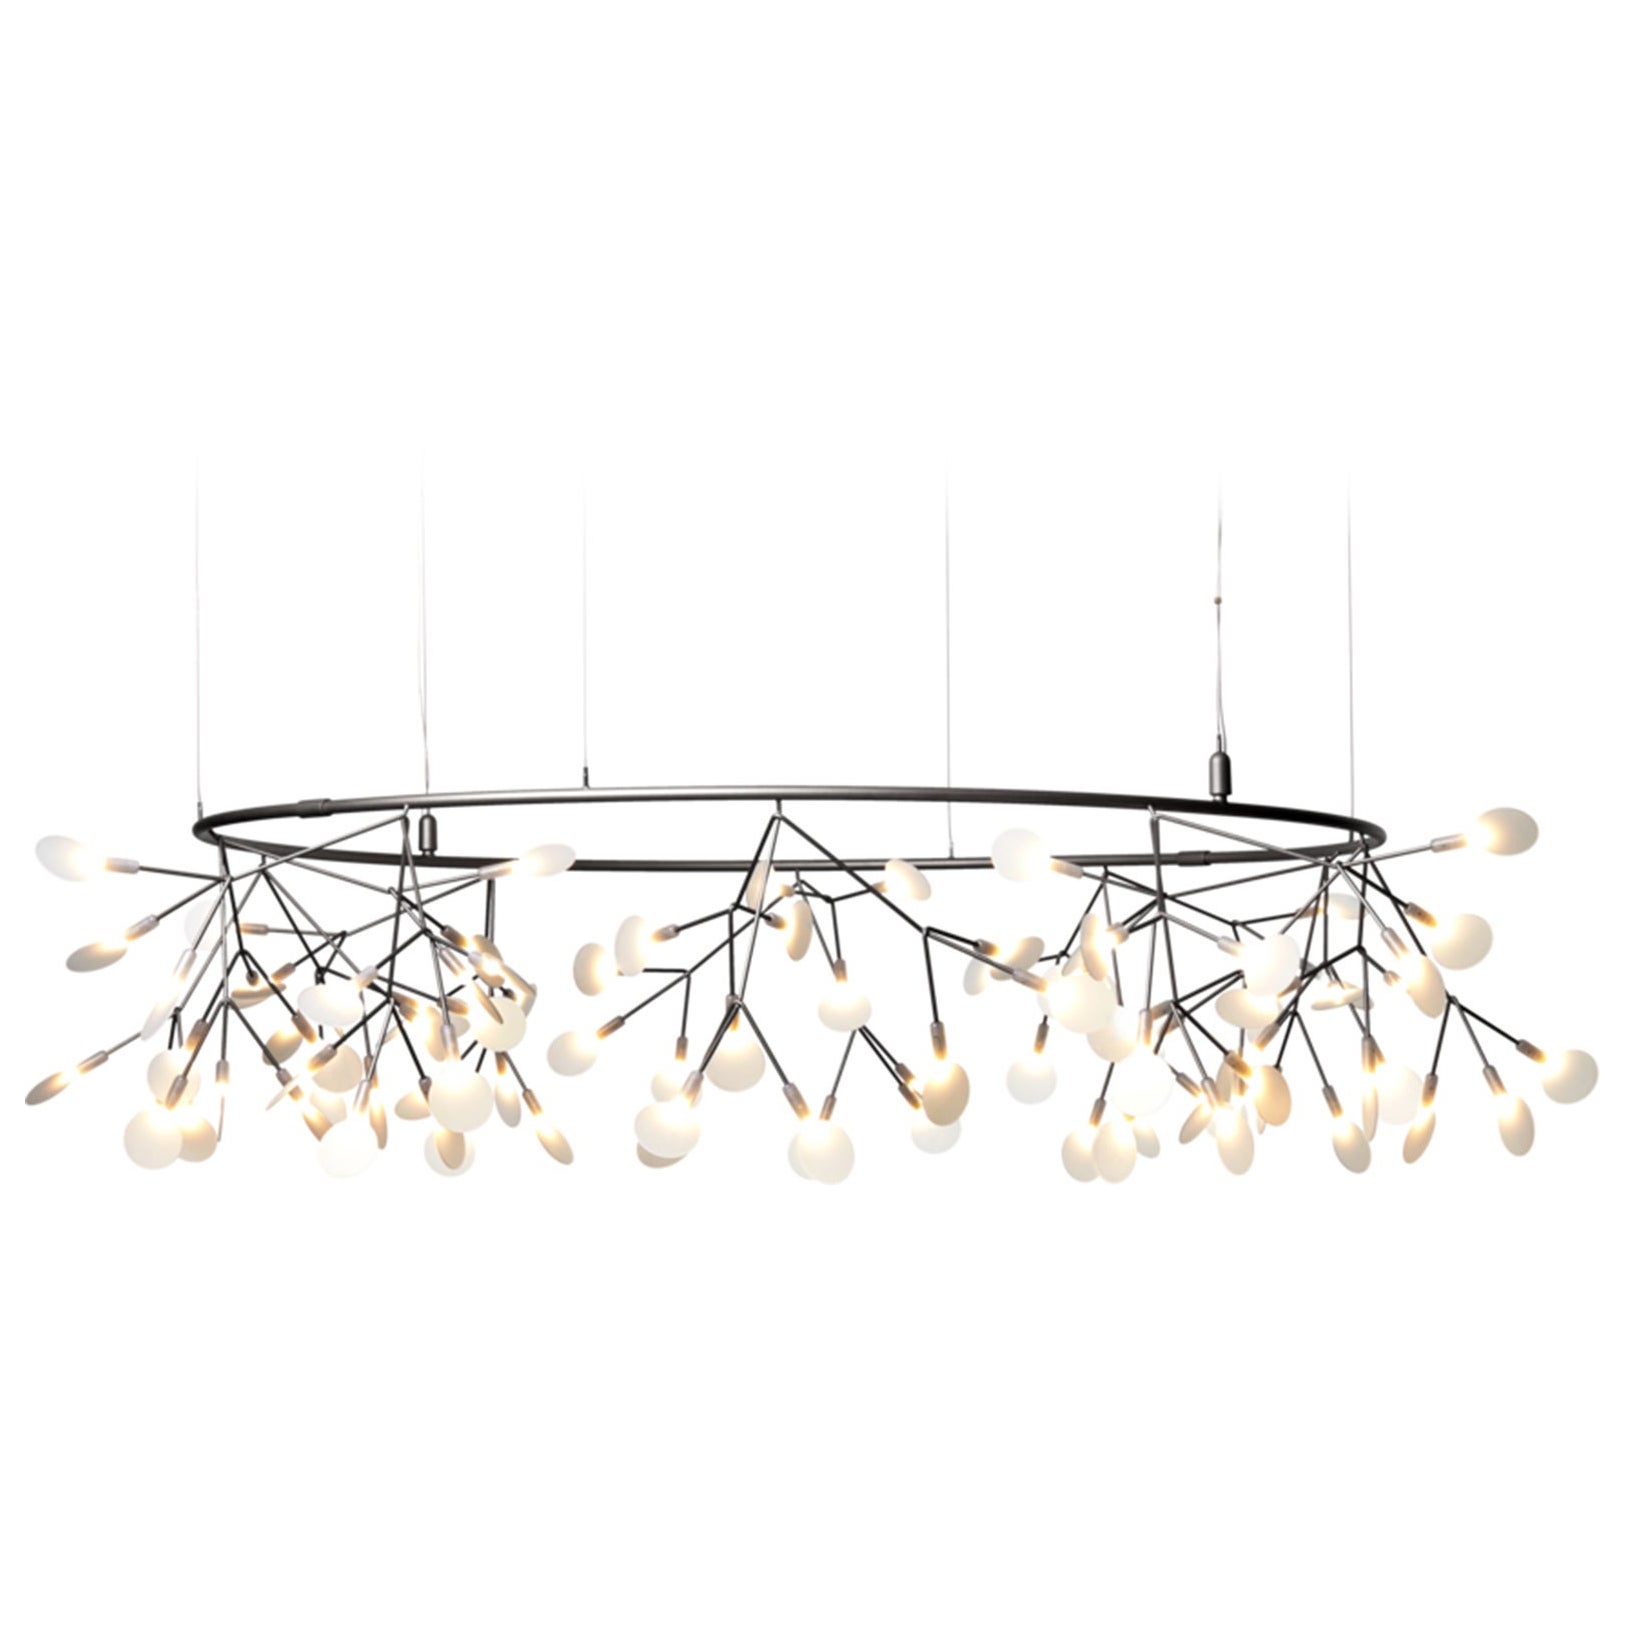 Moooi Heracleum The Big O Small Suspension Lamp in Nickel by Bertjan Pot, 10m  For Sale